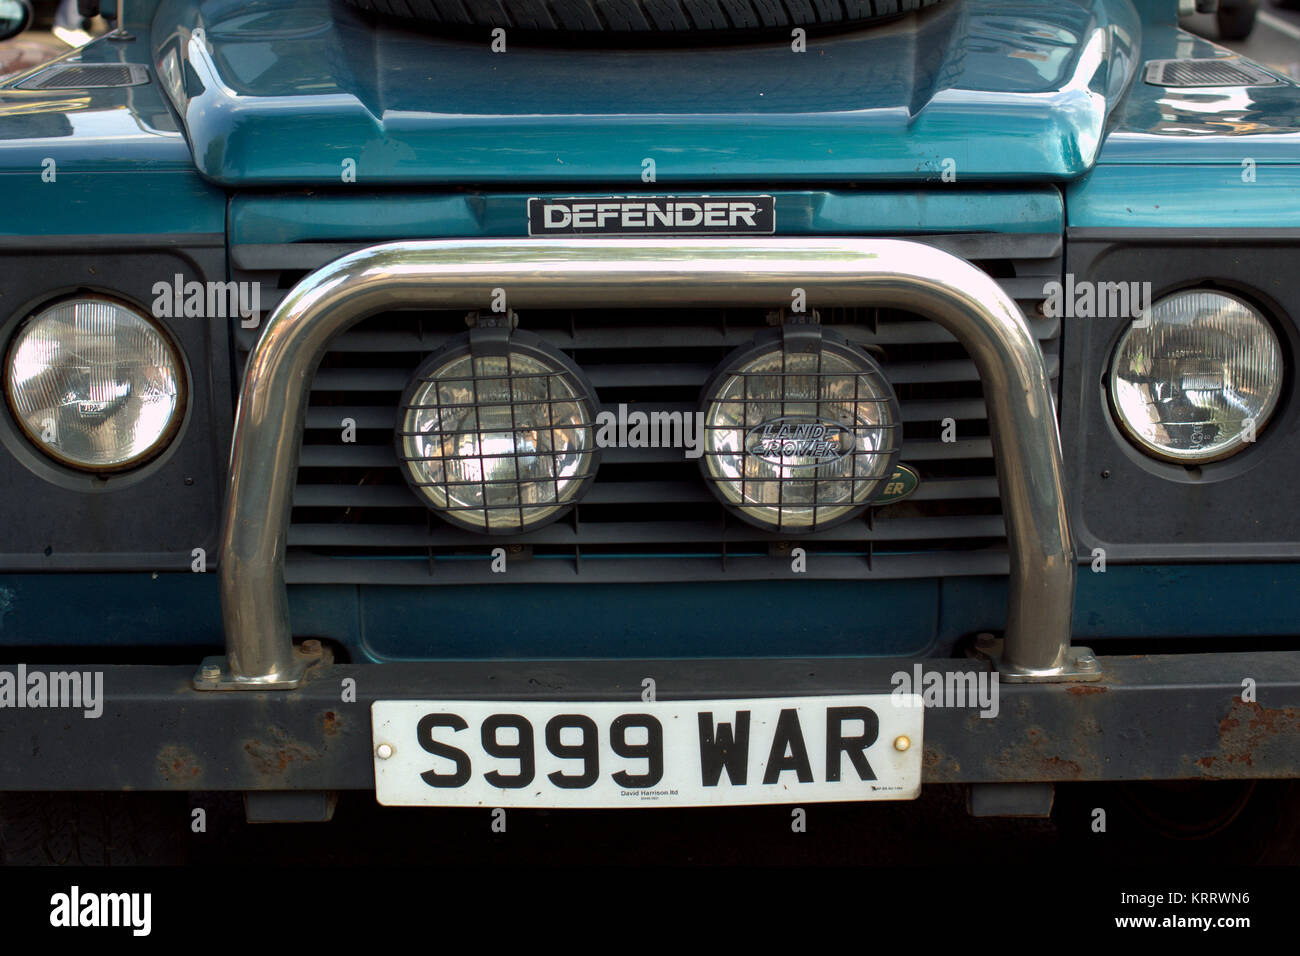 landrover defender car with war number plate Stock Photo